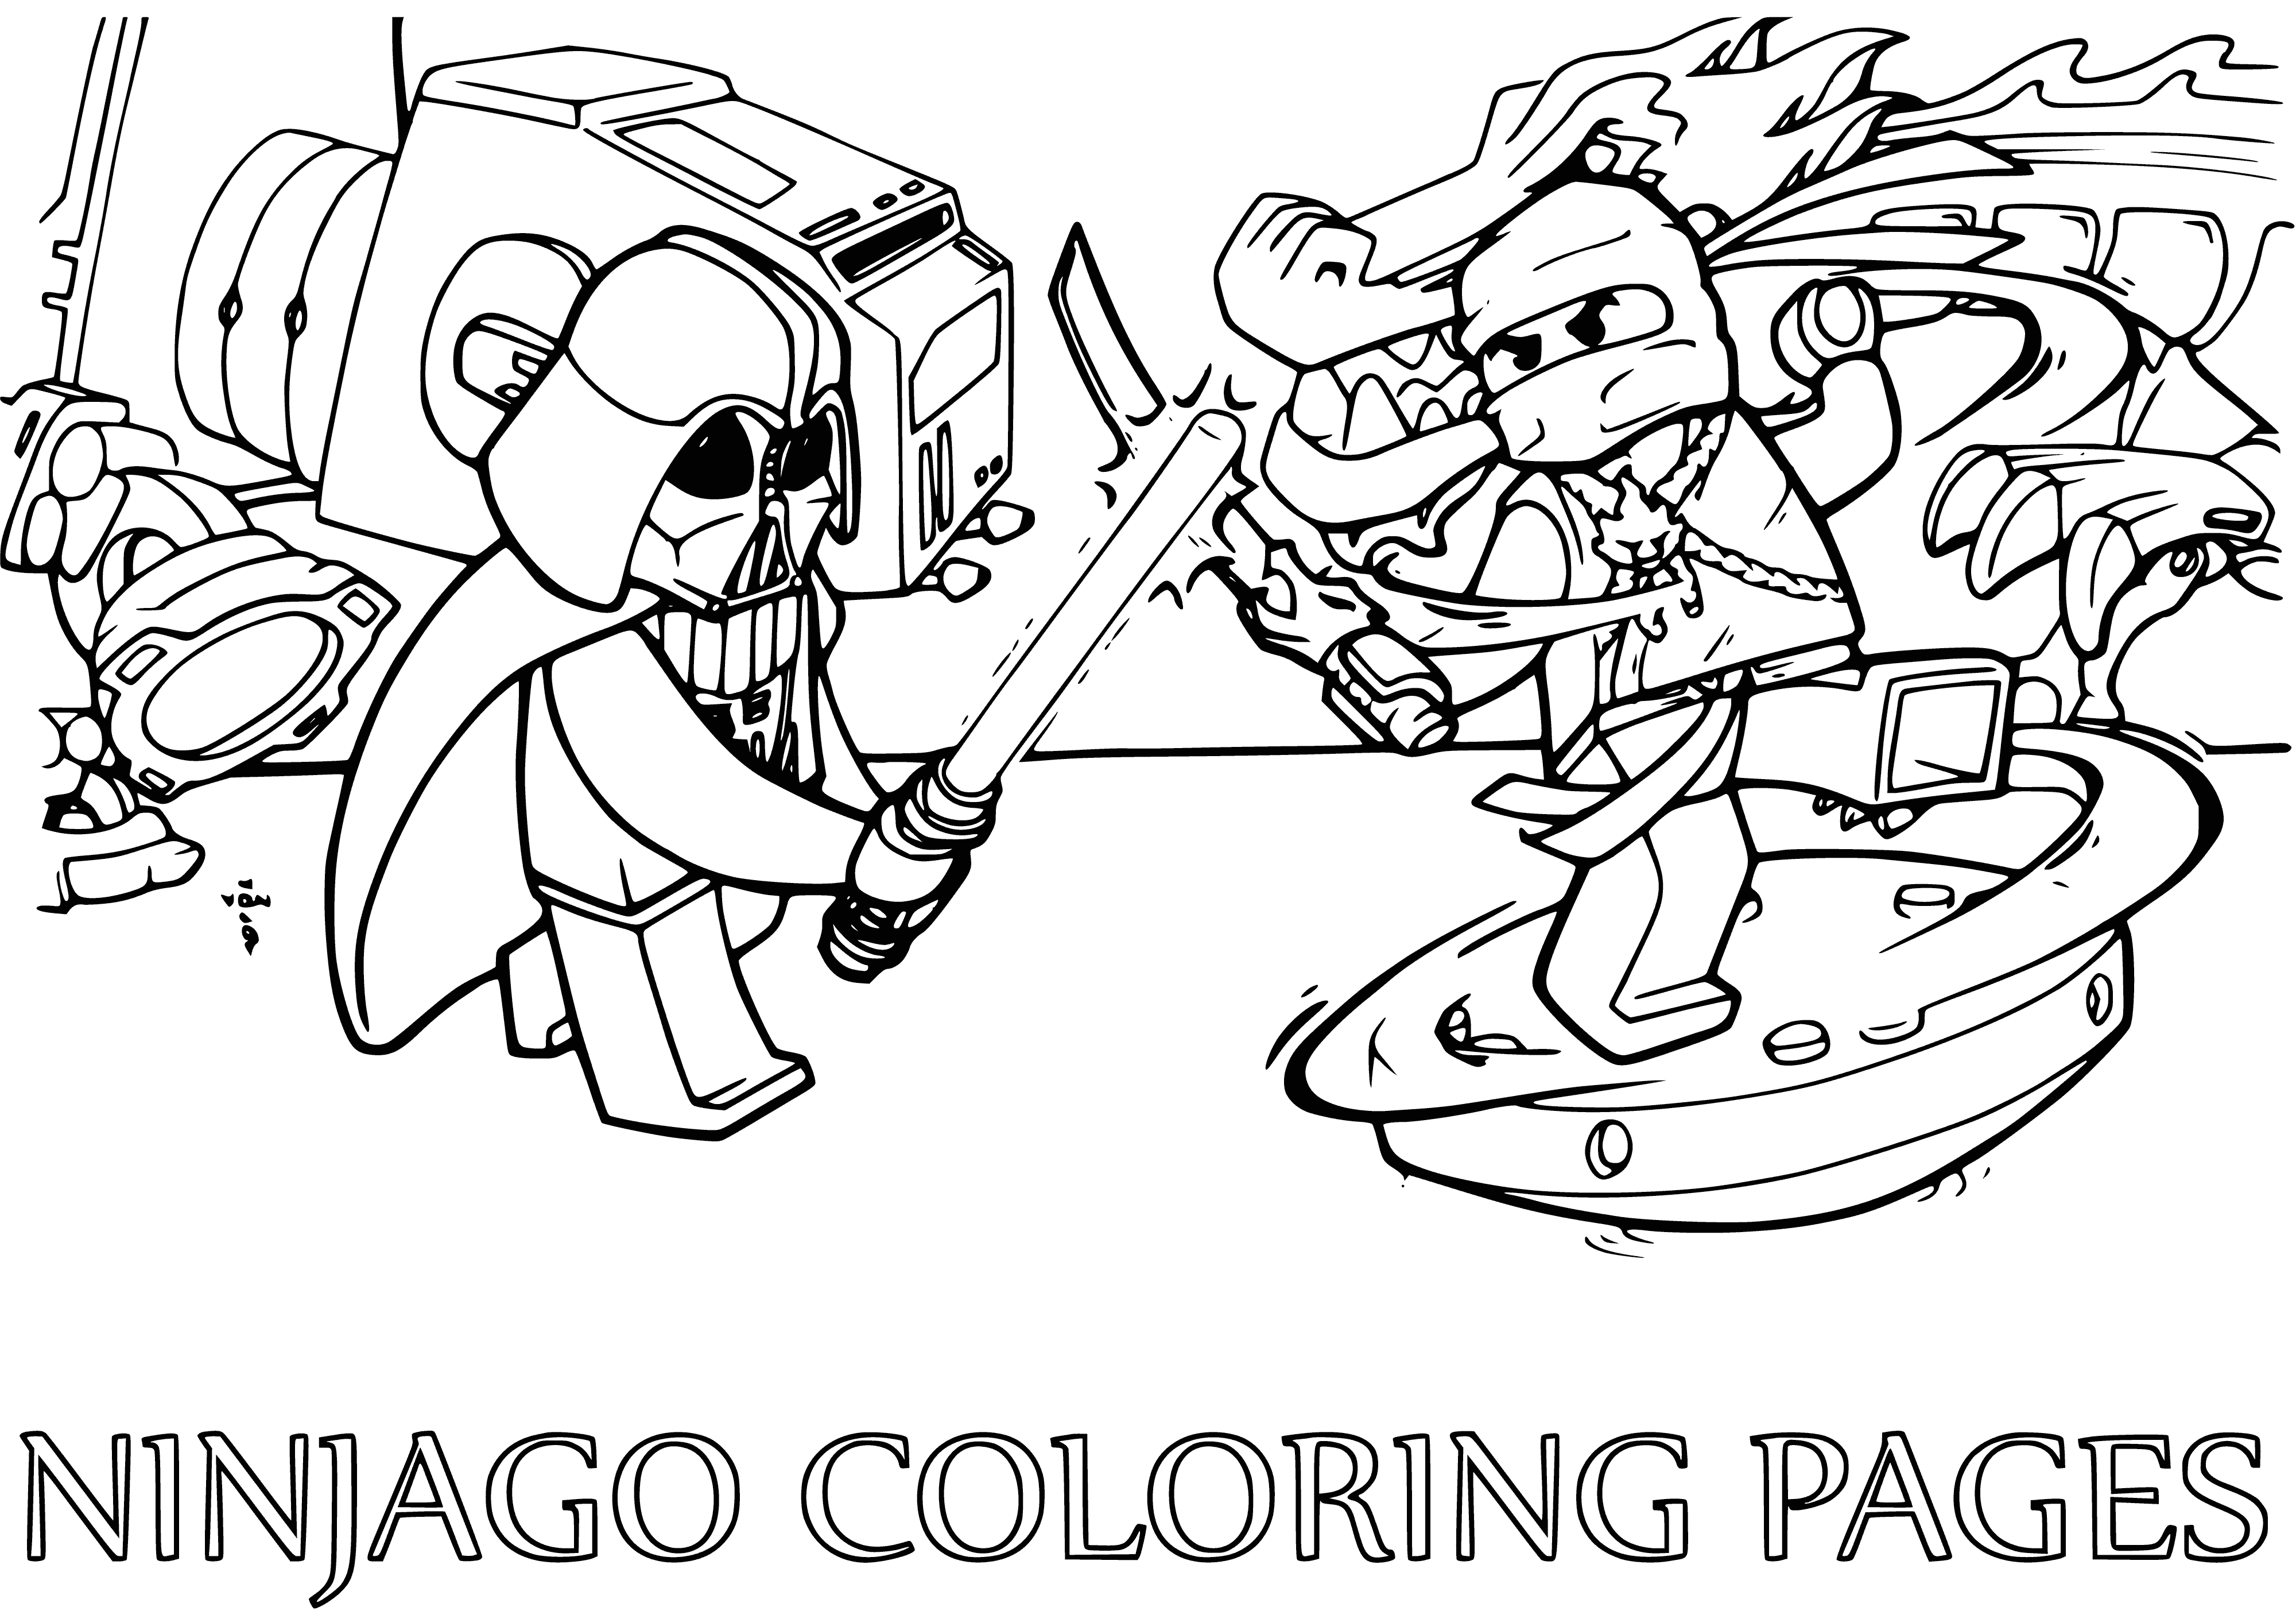 coloring page: Dark figure and ninjas face off behind Death Star: Darth Vader, powerful villain from Star Wars, stands arms crossed in classic armor as ninjas in green & black armed with swords & daggers prepare to fight him & his ship.